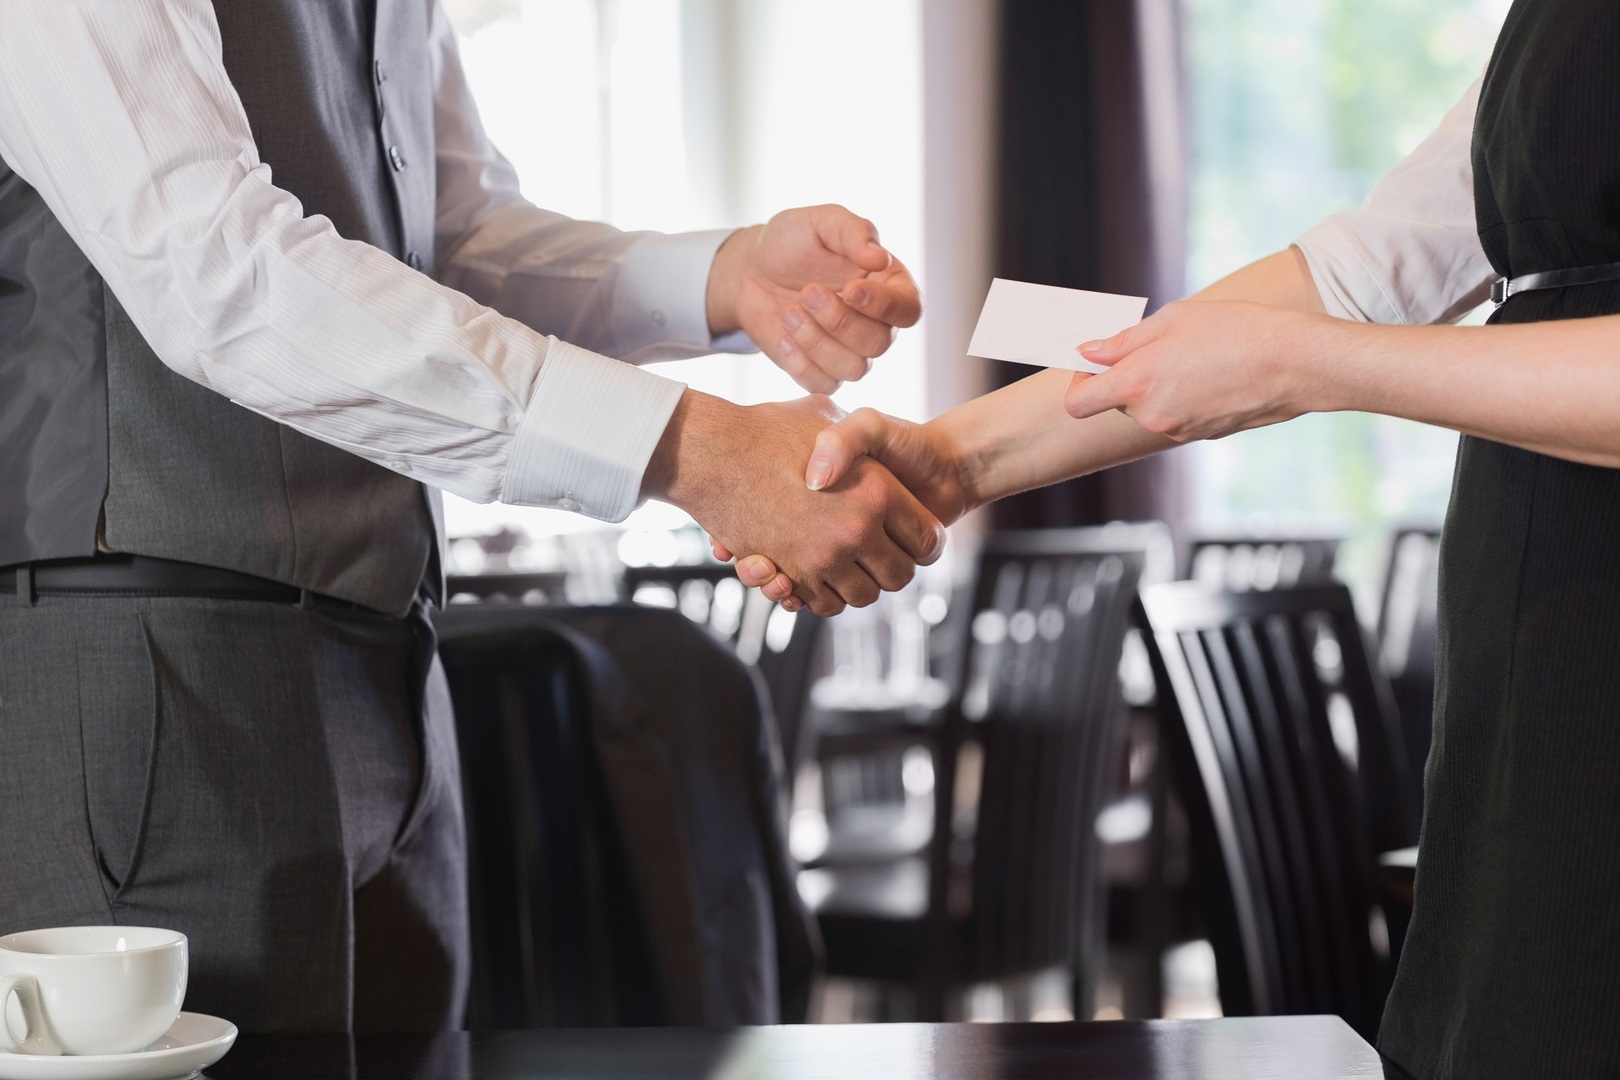 Busines people shaking hands after meeting and changing cards in restaurant